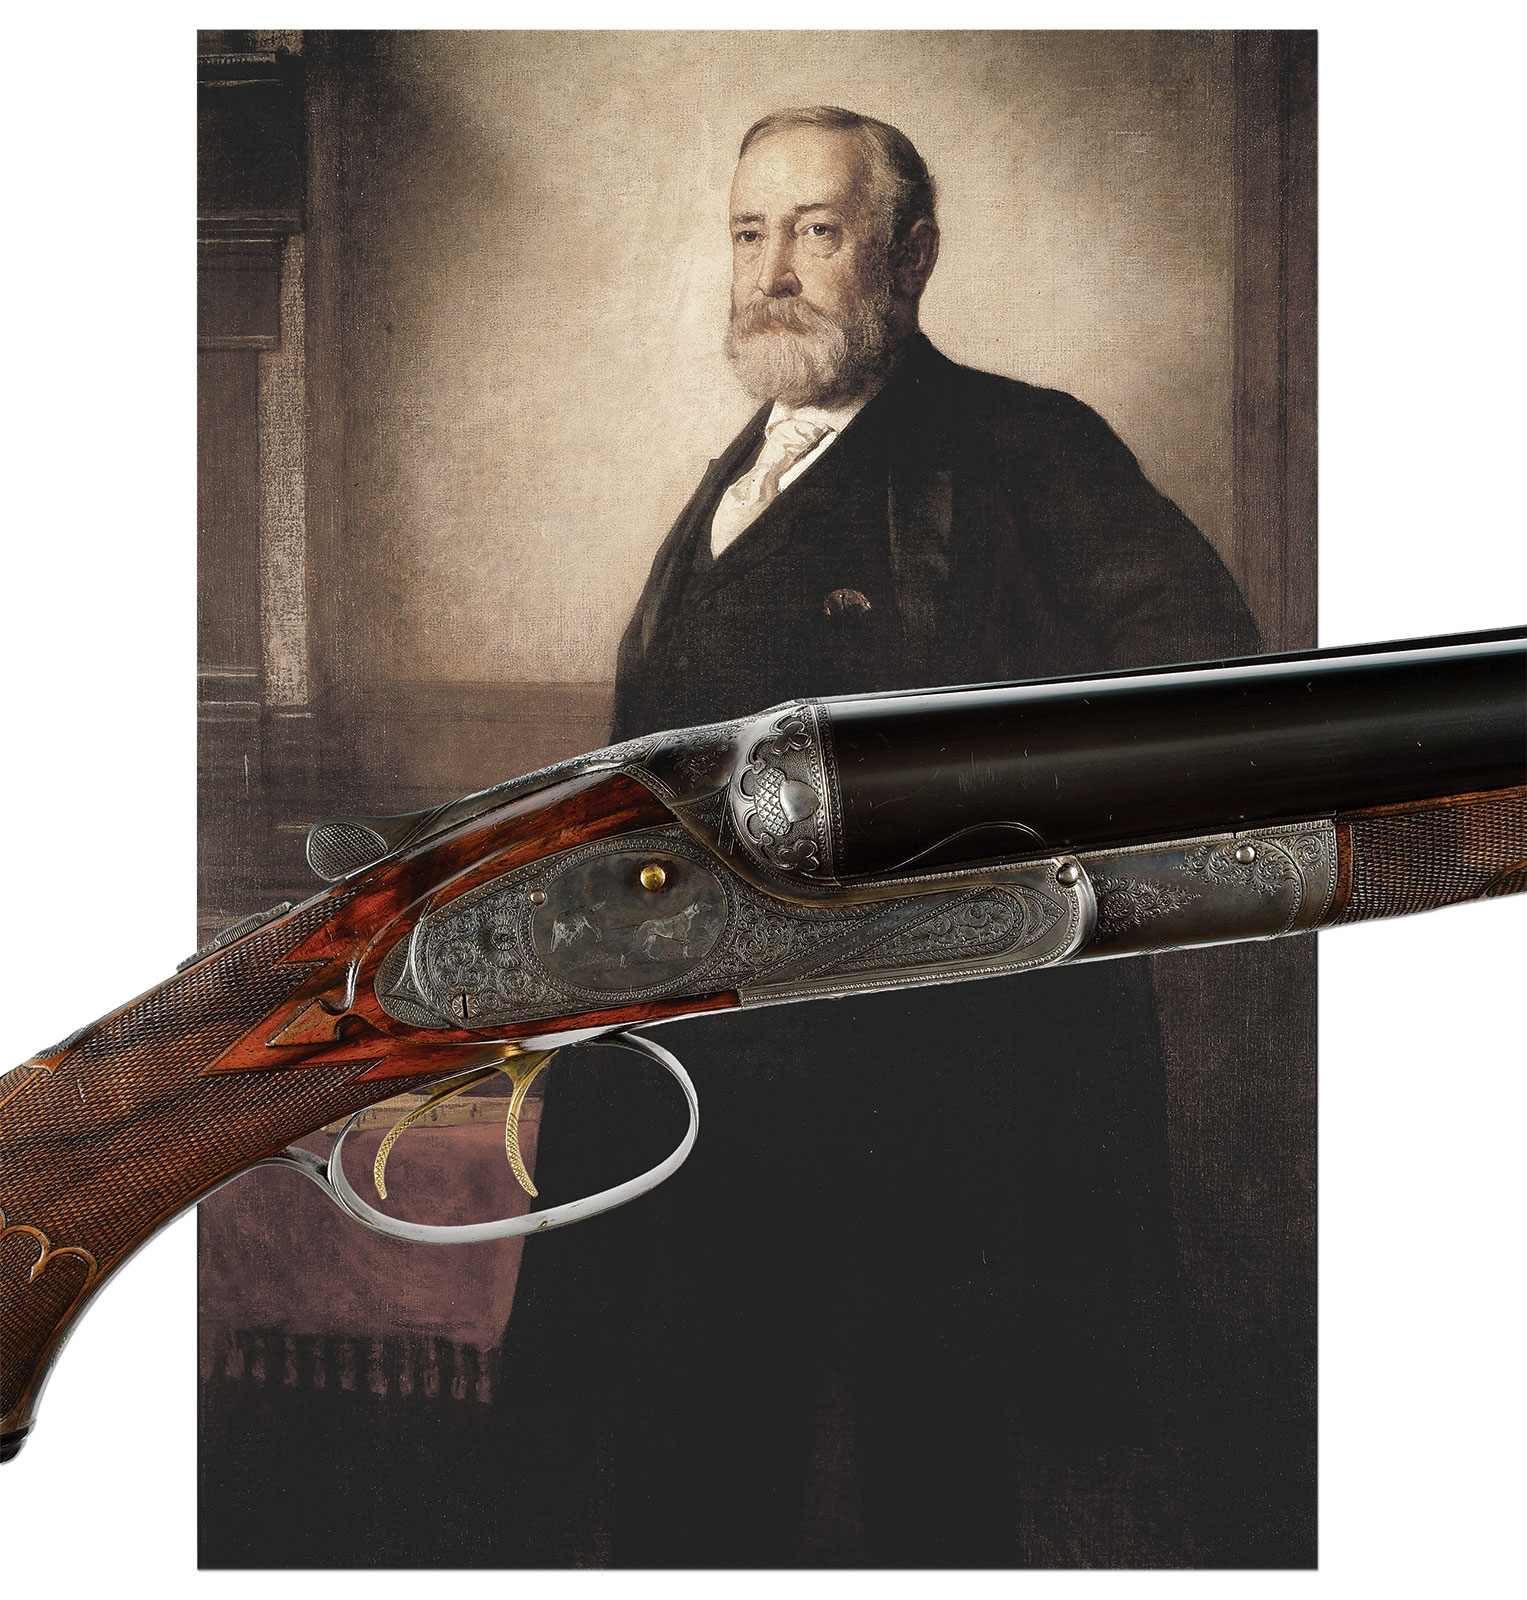 Spectacular Presidential Lefever “Optimus” Quality Shotgun, Presented to Benjamin Harrison for His “Protection to American Industry", Sold for $120,750